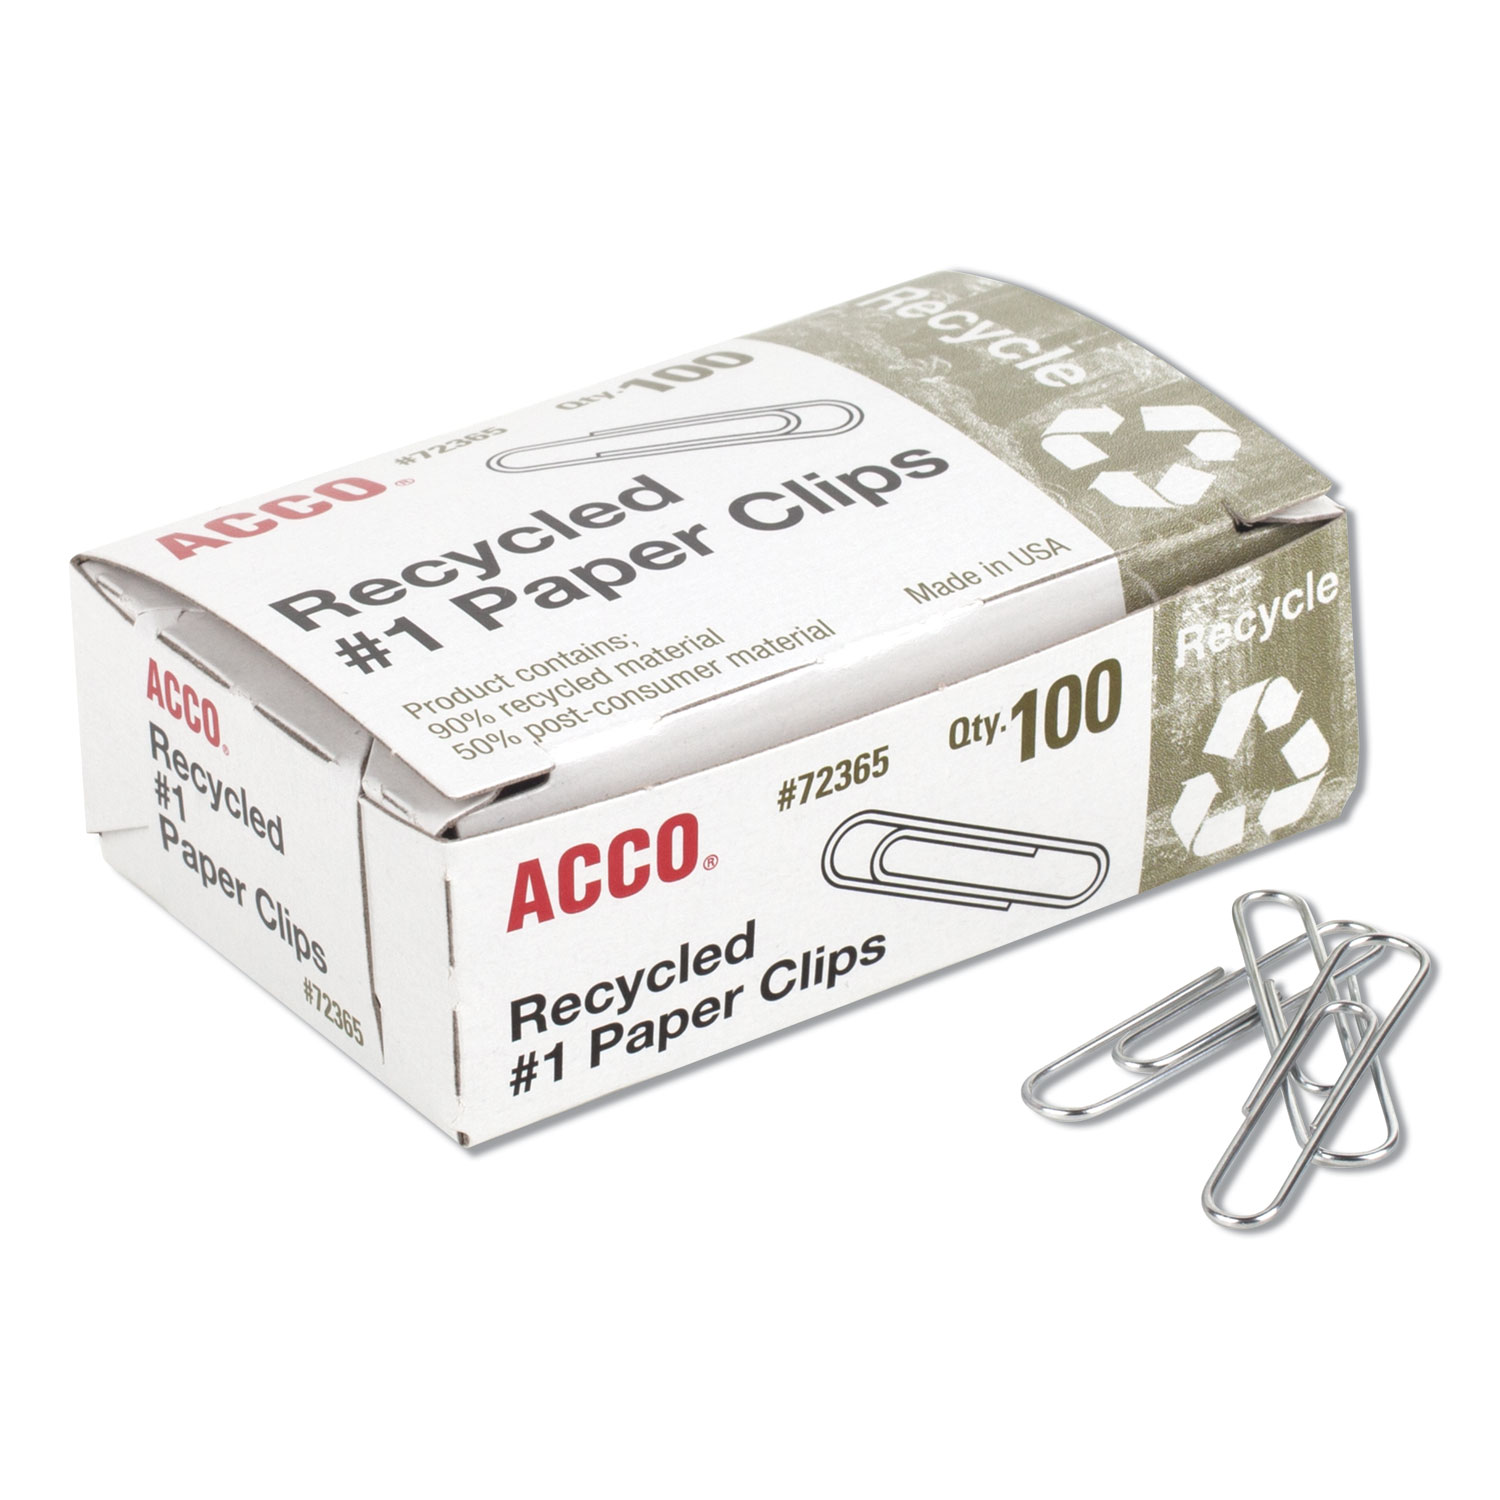  ACCO A7072365A Recycled Paper Clips, Medium (No. 1), Silver, 100/Box, 10 Boxes/Pack (ACC72365) 